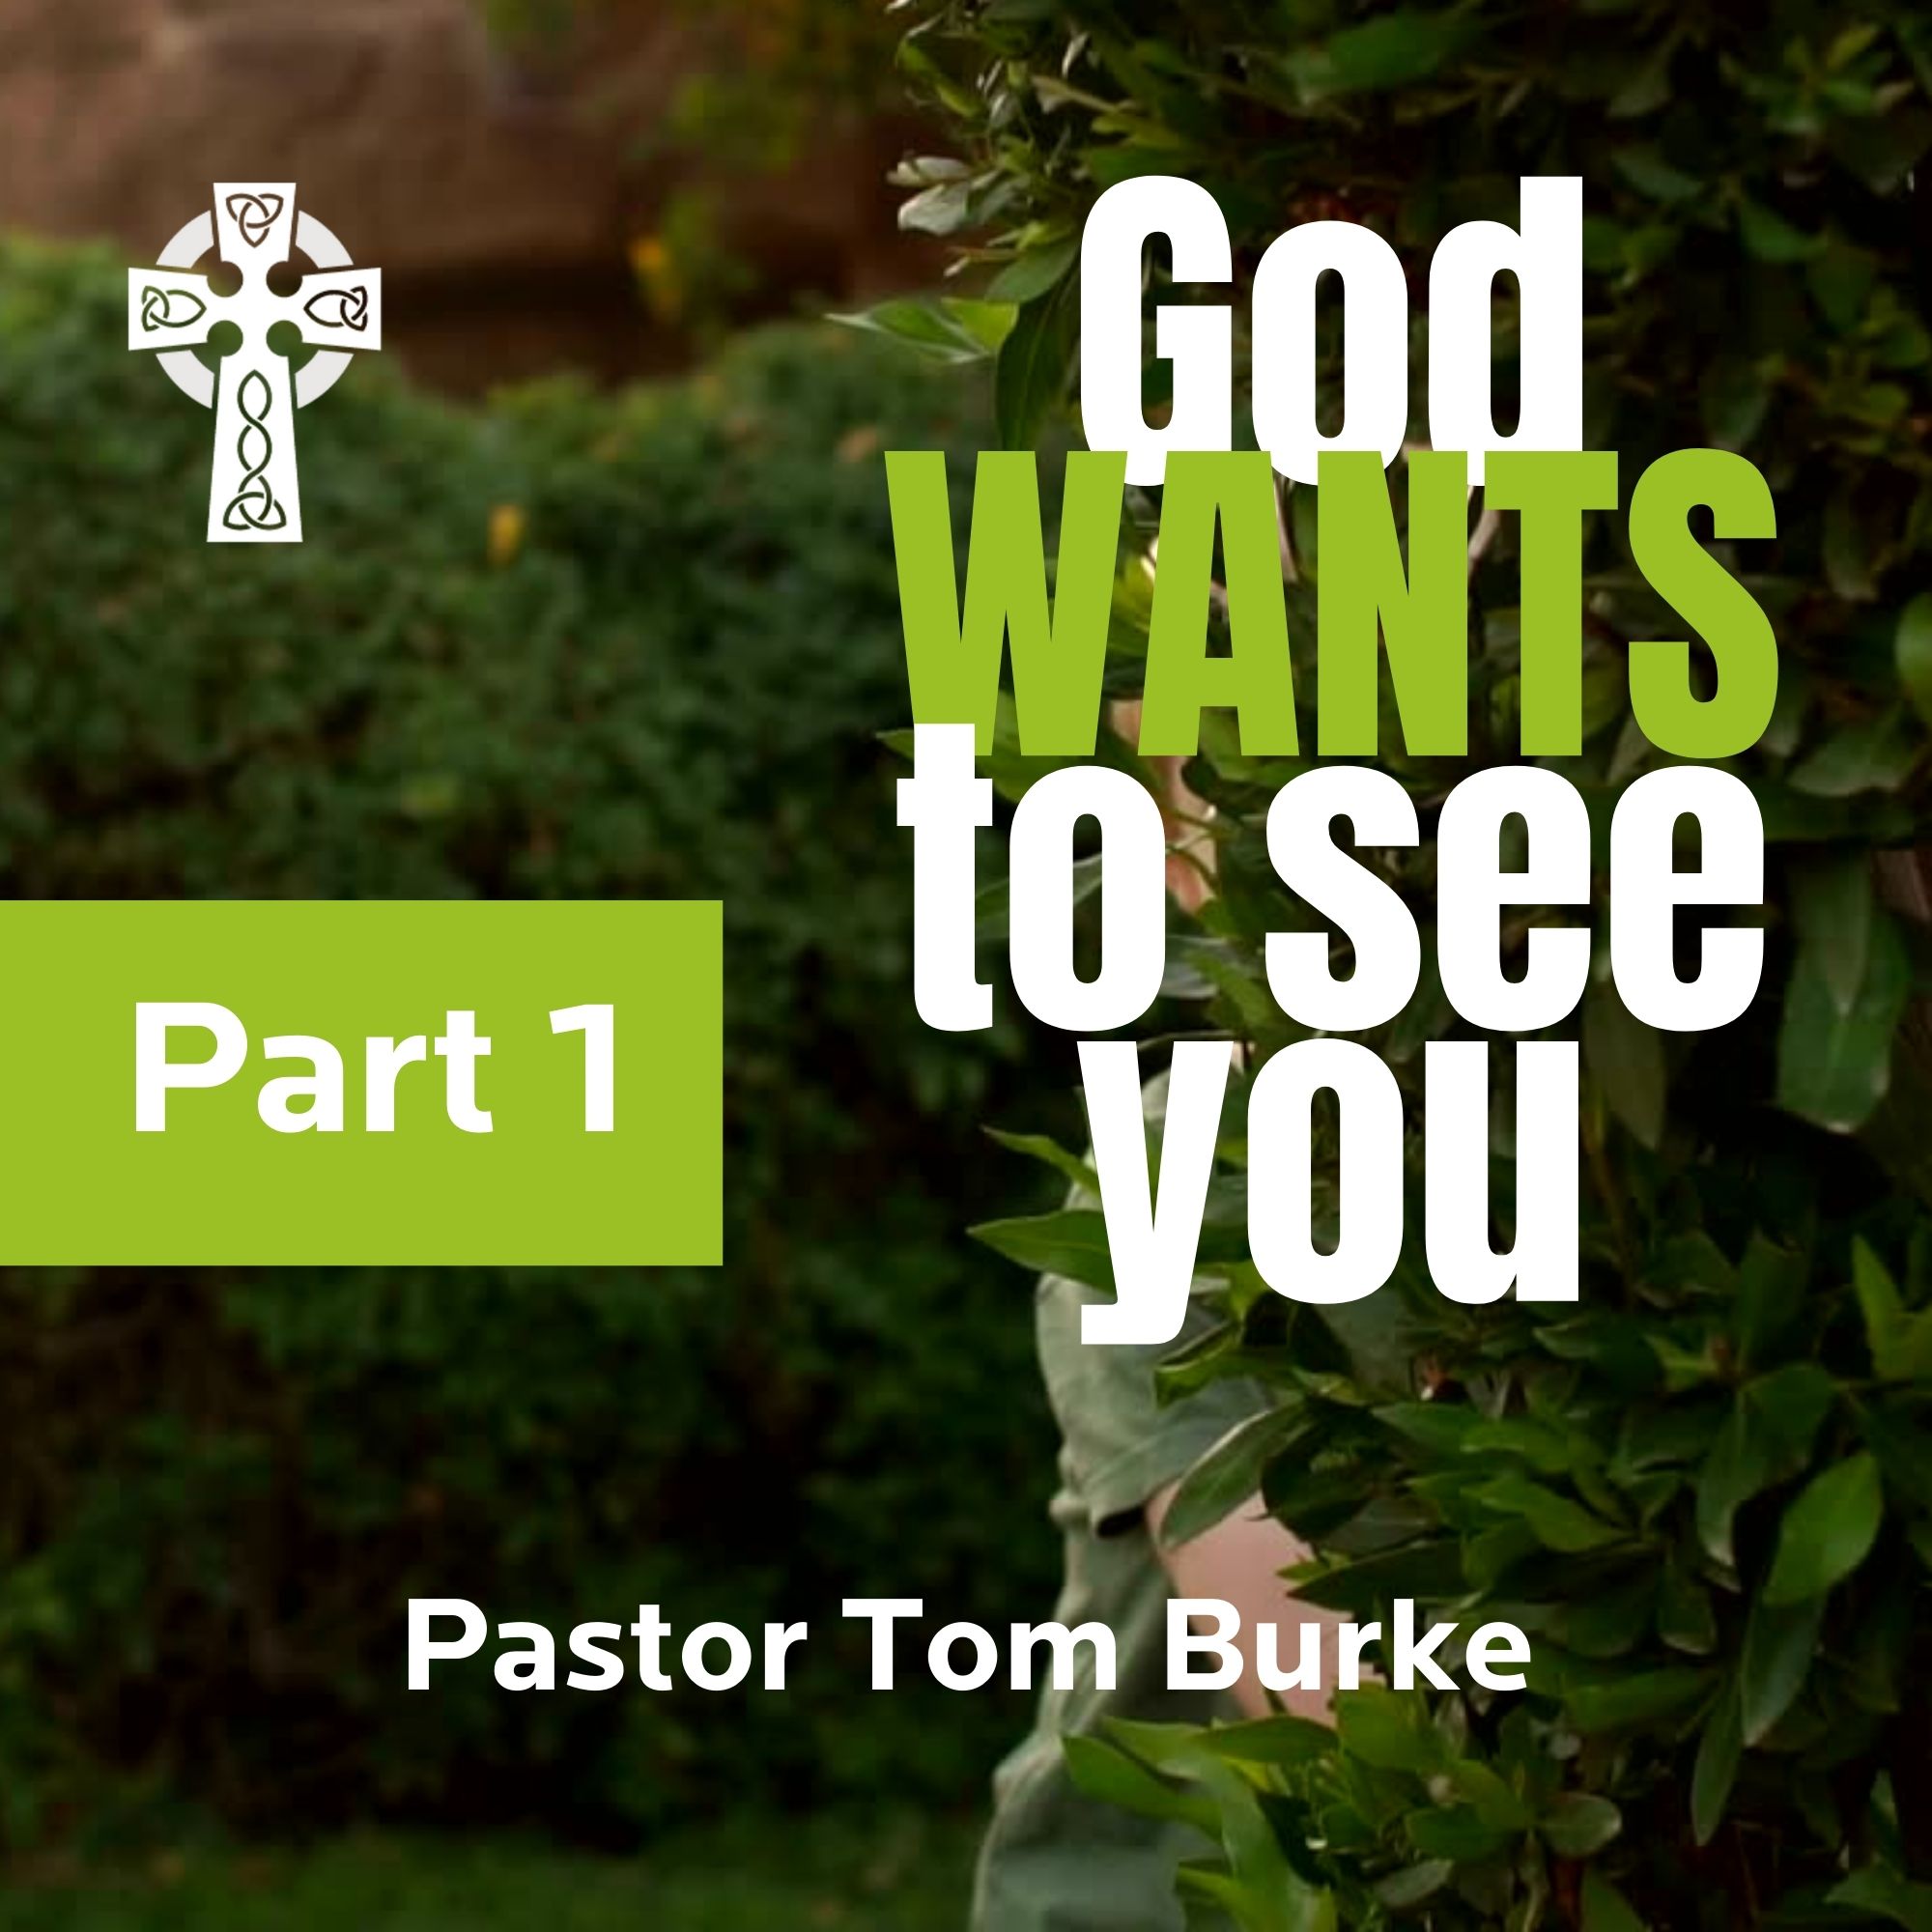 God WANTS to see you - Pastor Tom Burke